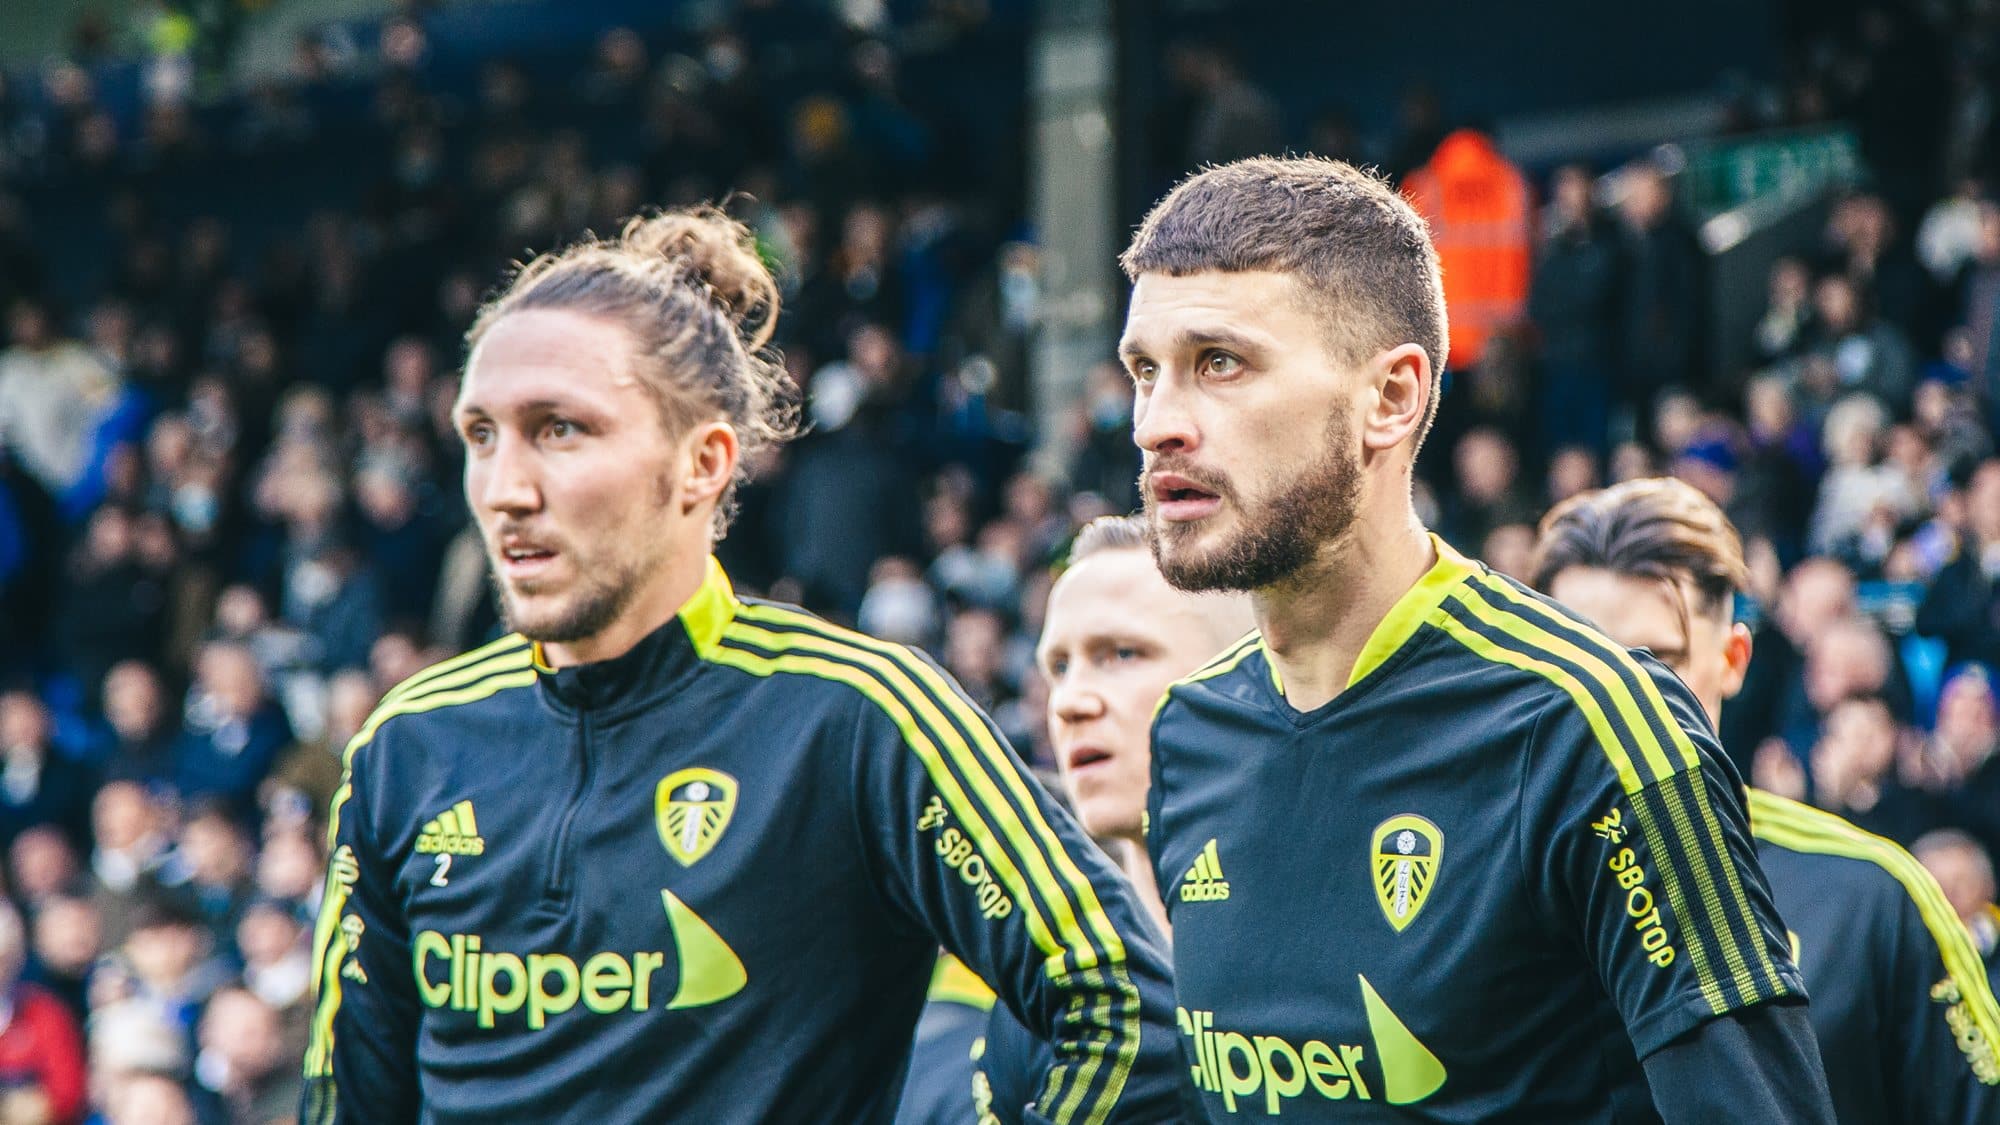 Luke Ayling and Mateusz Klich in the warmup before the Burnley game